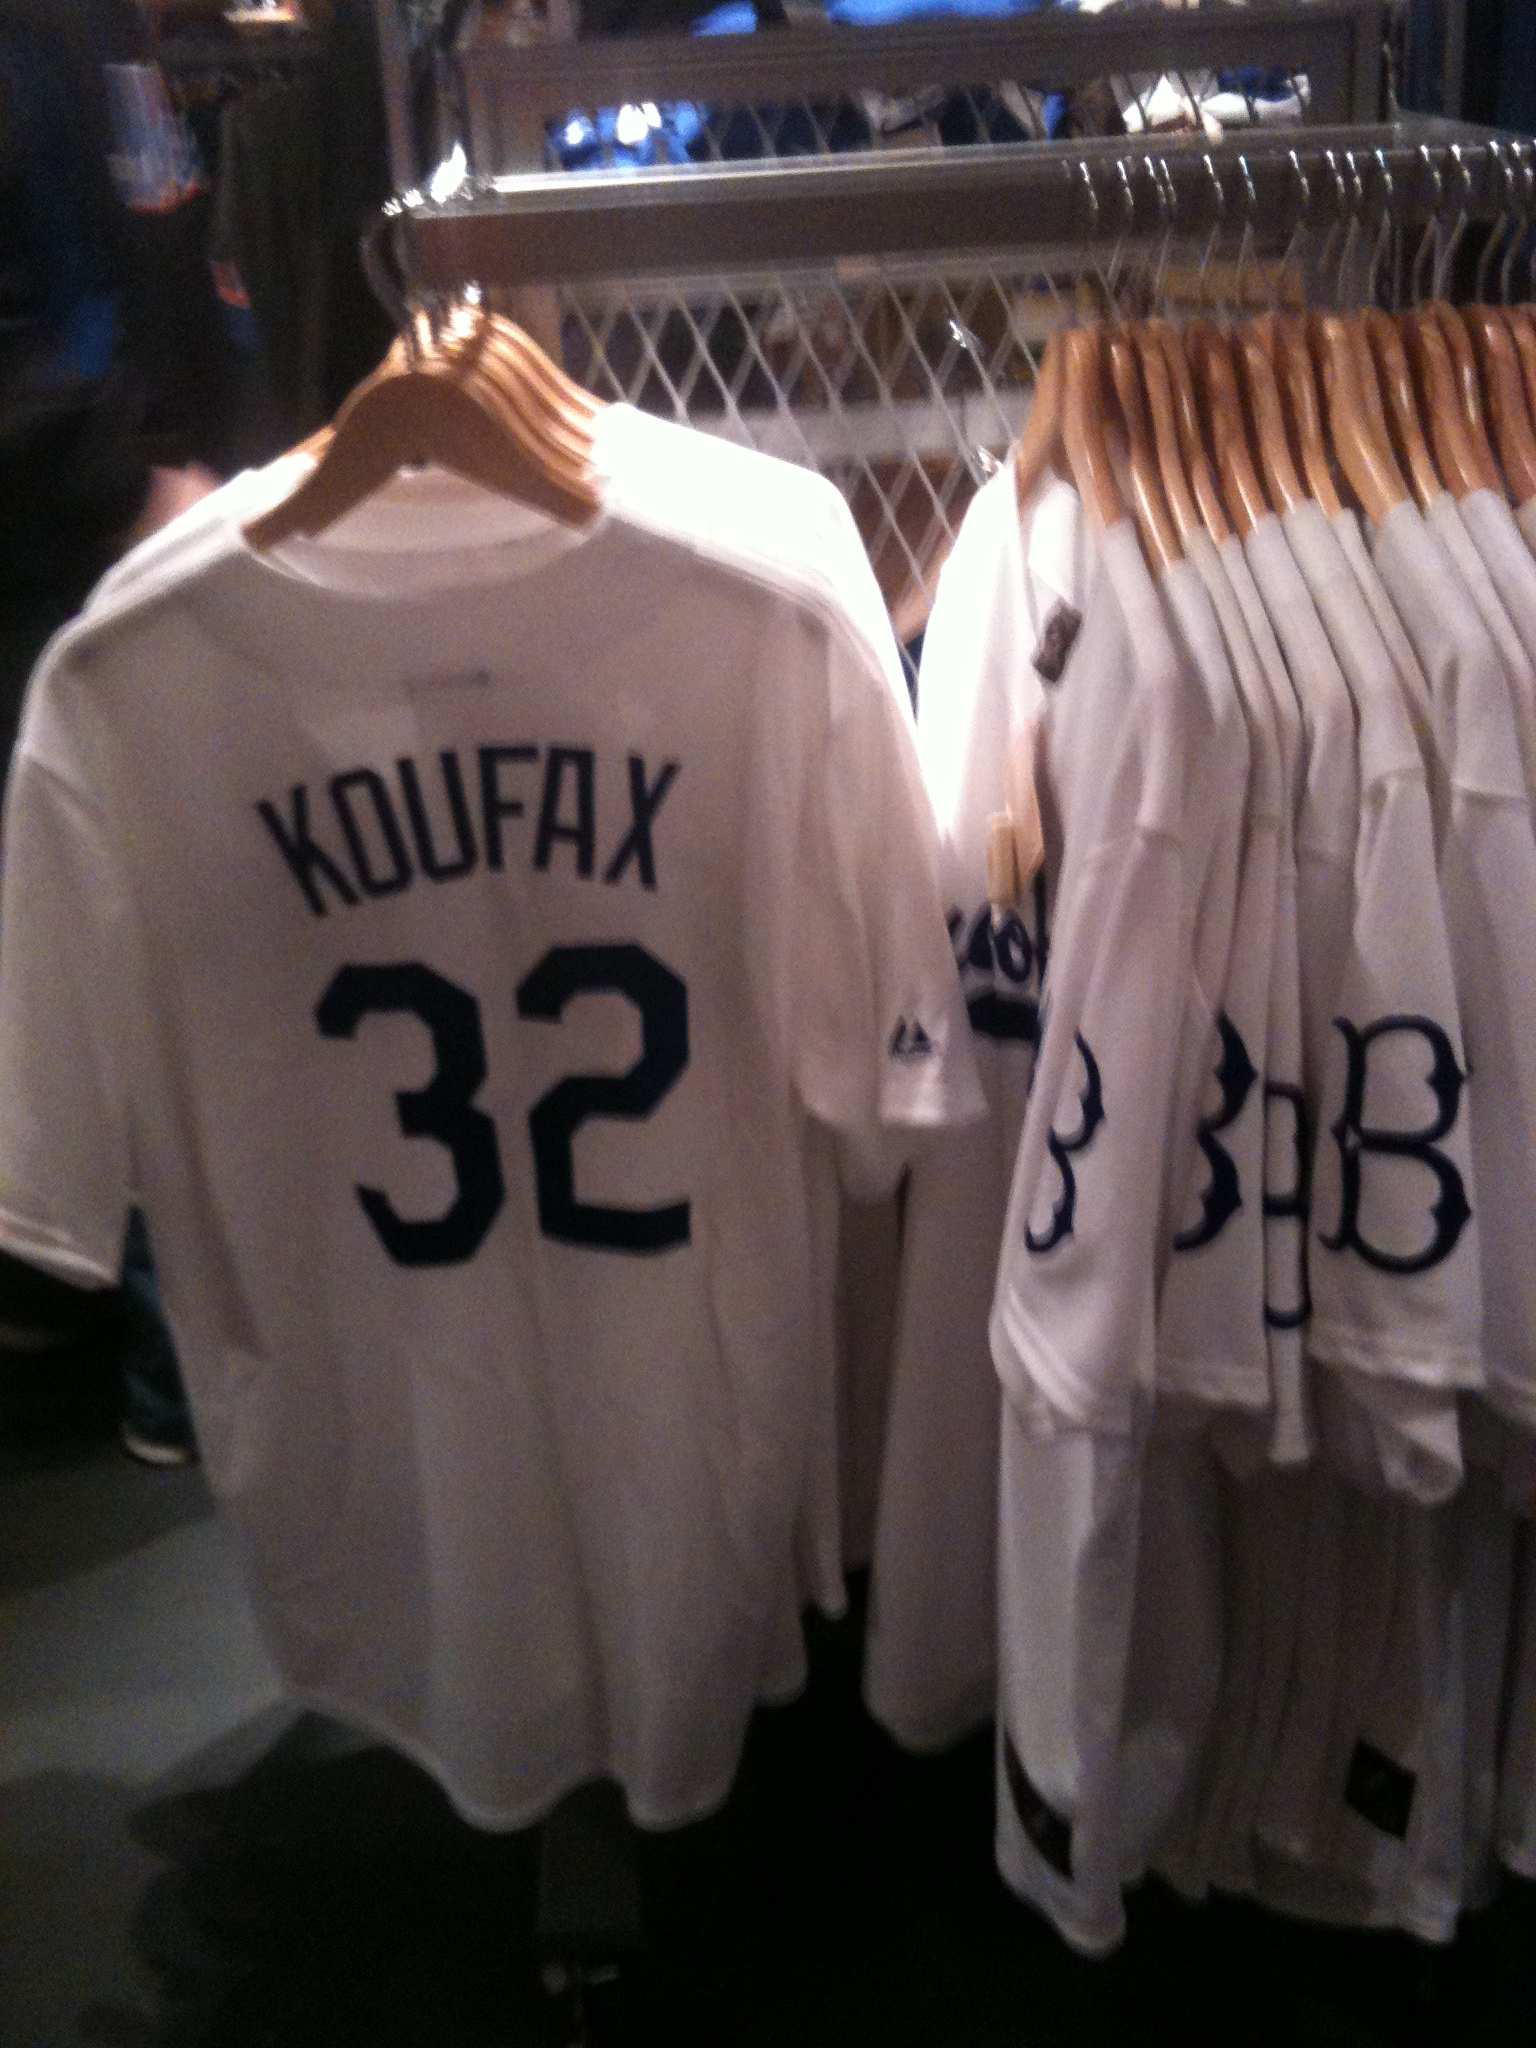 Why do the Mets sell Sandy Koufax jerseys?